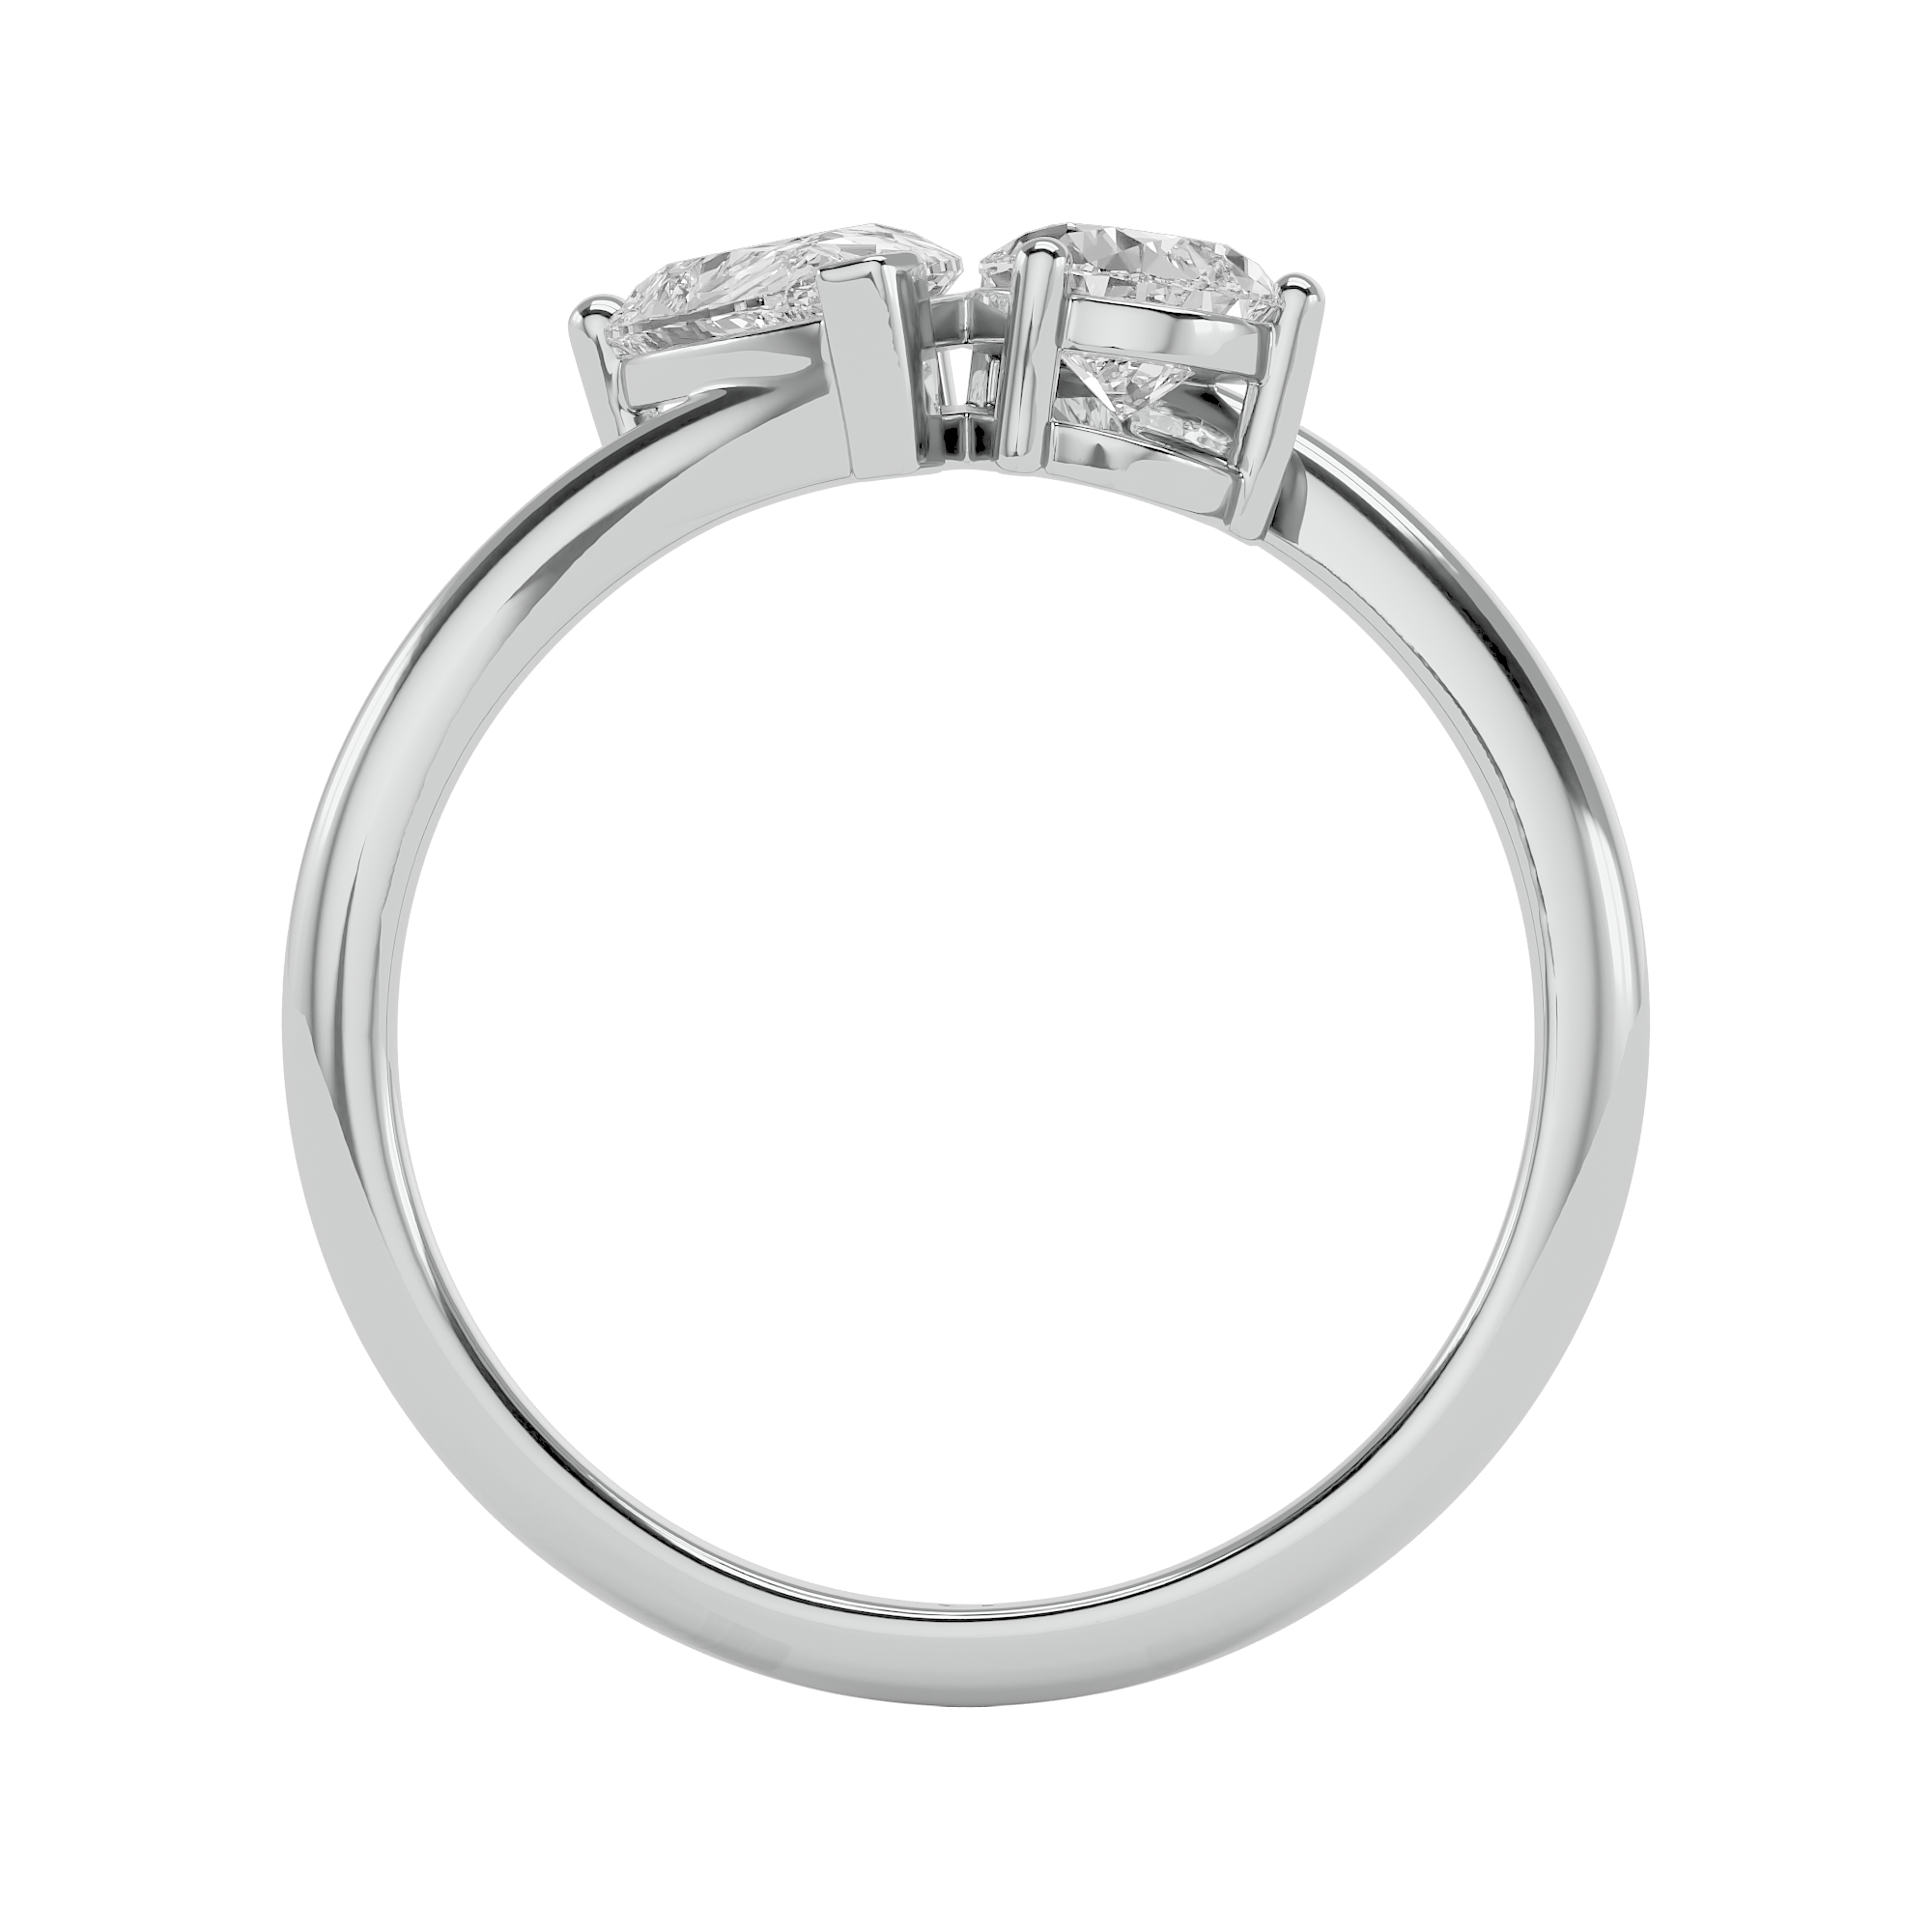 1.5 Ct Solitaire Lab Grown Diamond Ring in 14Kt white gold